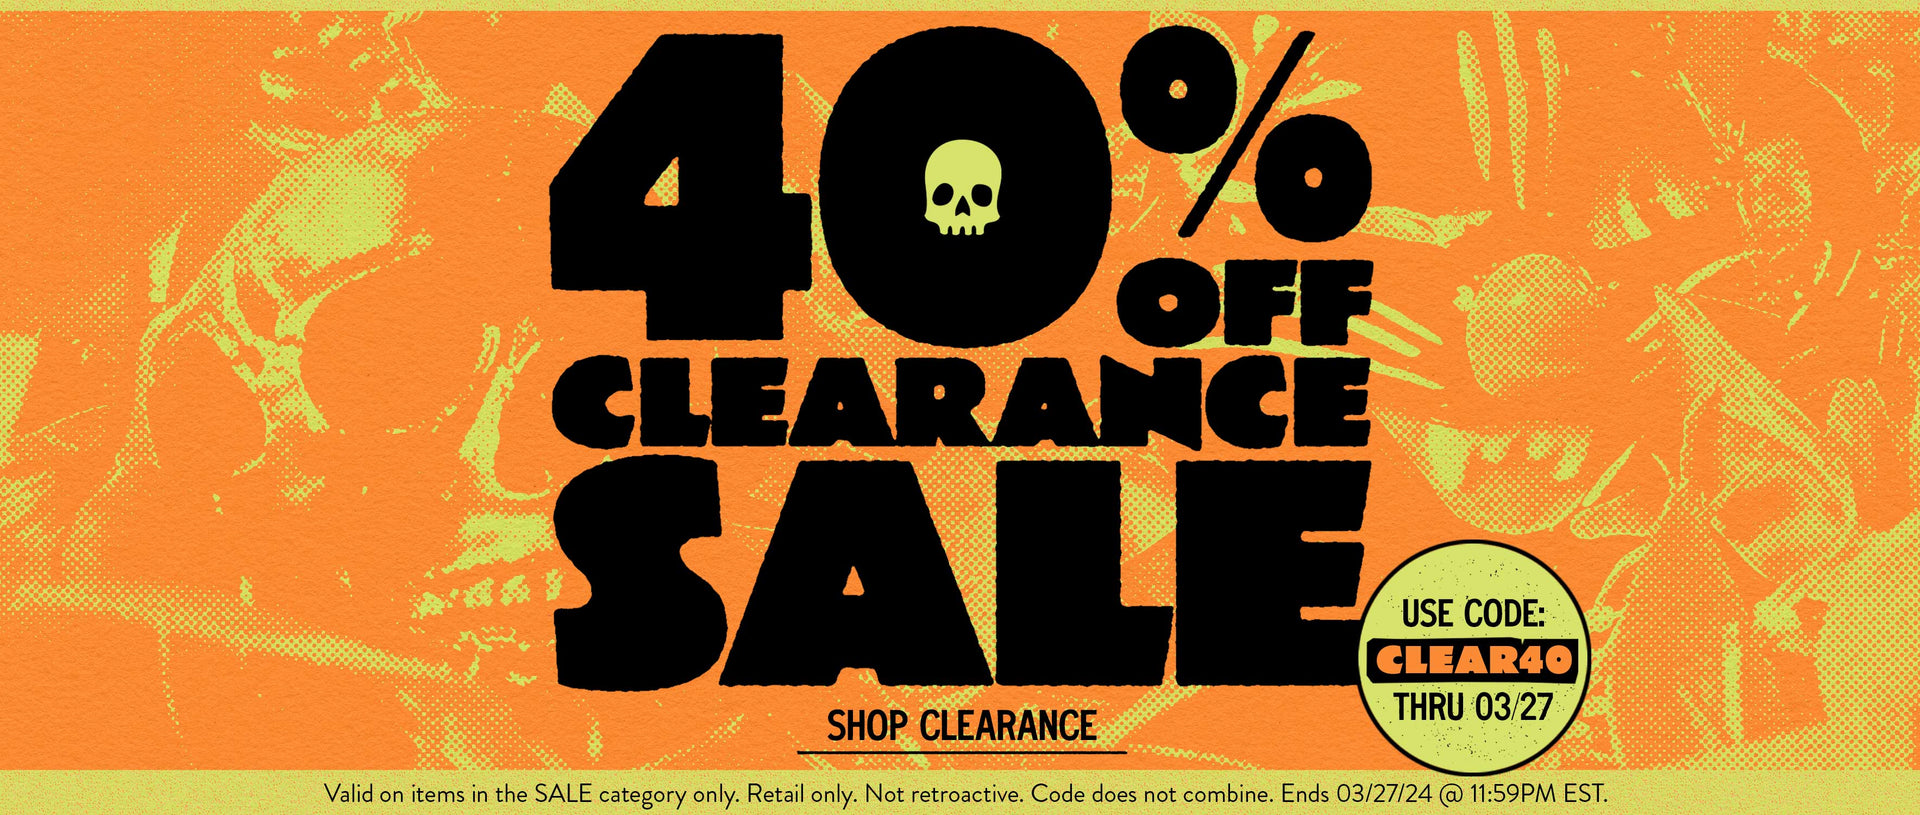 40% OFF CLEARANCE